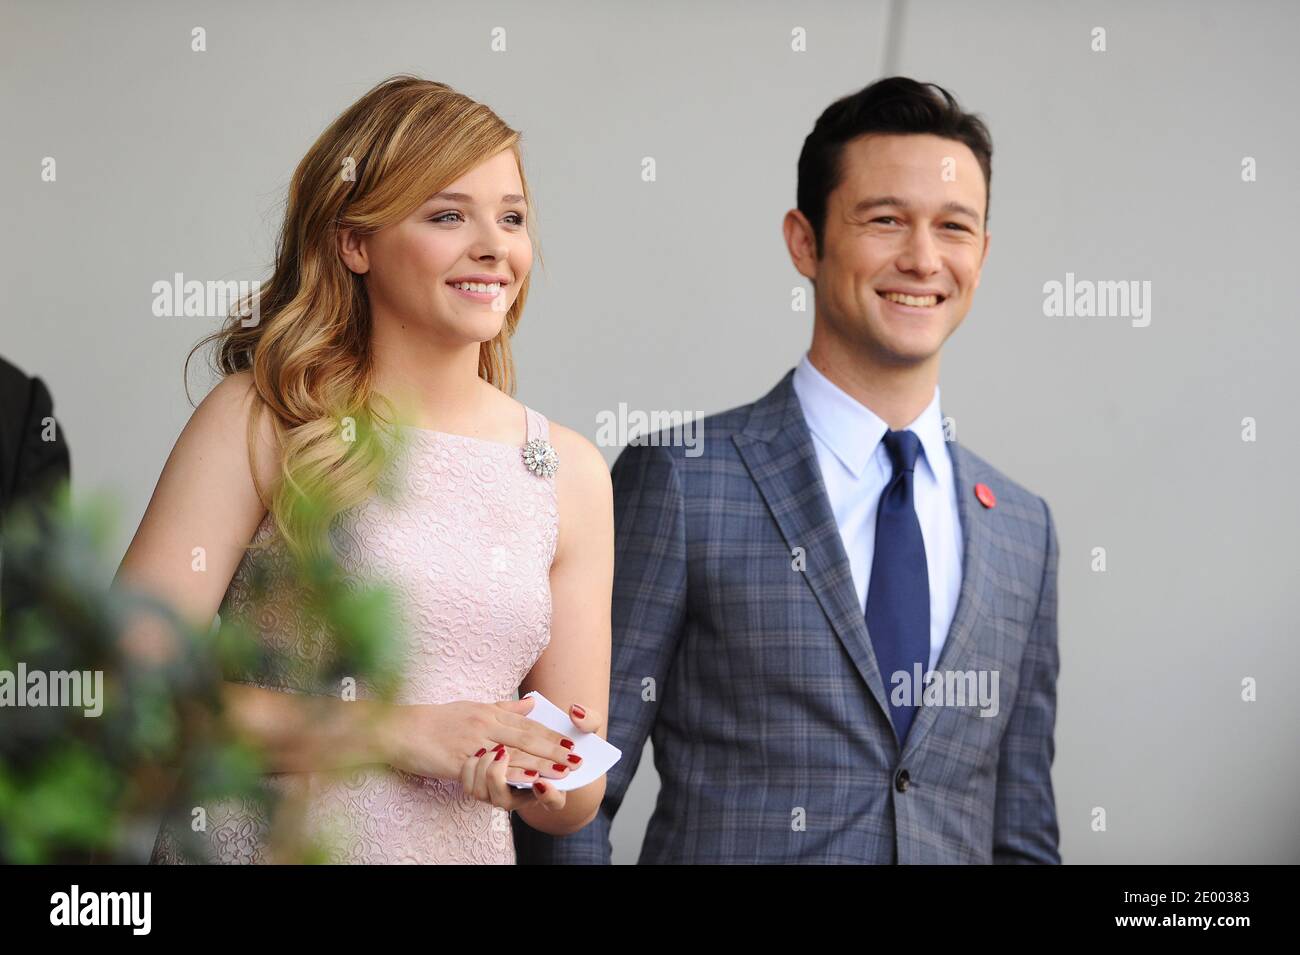 Chloe Grace Moretz and Joseph Gordon Levitt attend the ceremony honoring Julianne Moore with a star on the Hollywood Walk of Fame in Los Angeles, CA, USA, on October 3, 2013. Photo by Lionel Hahn/ABACAPRESS.COM Stock Photo